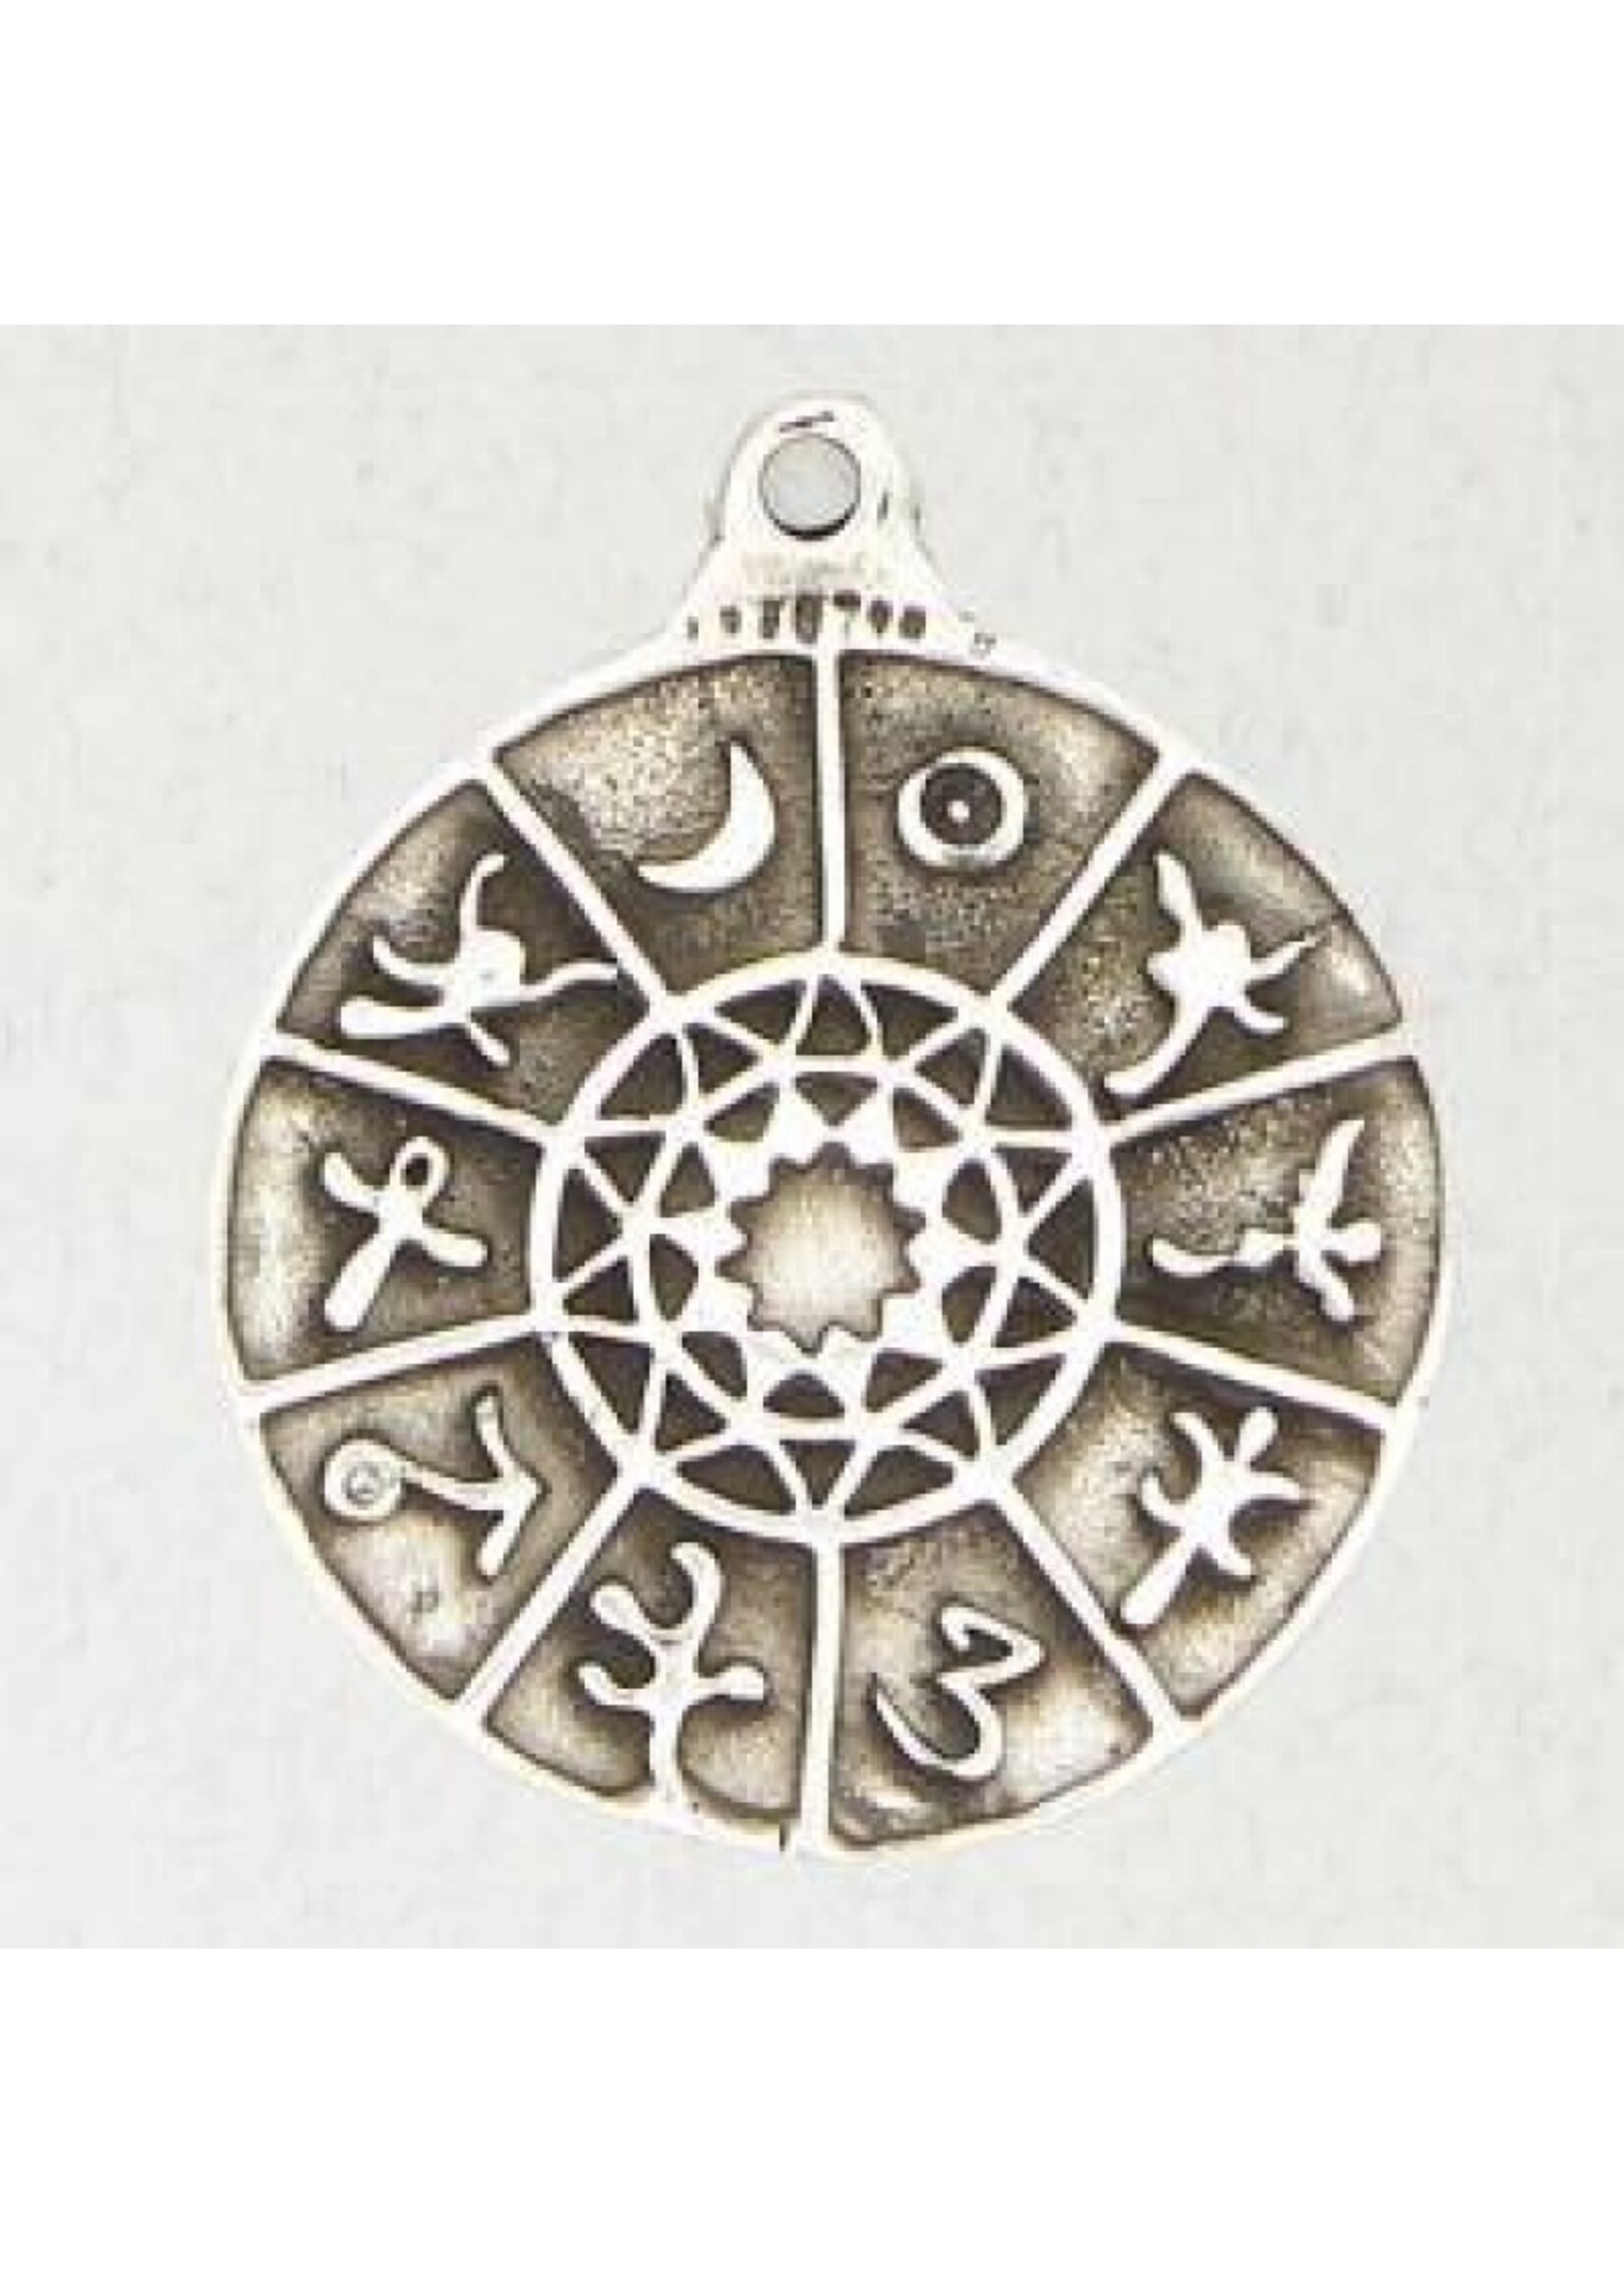 Talisman Amulets Pewter Pendant - The Planetary Sign